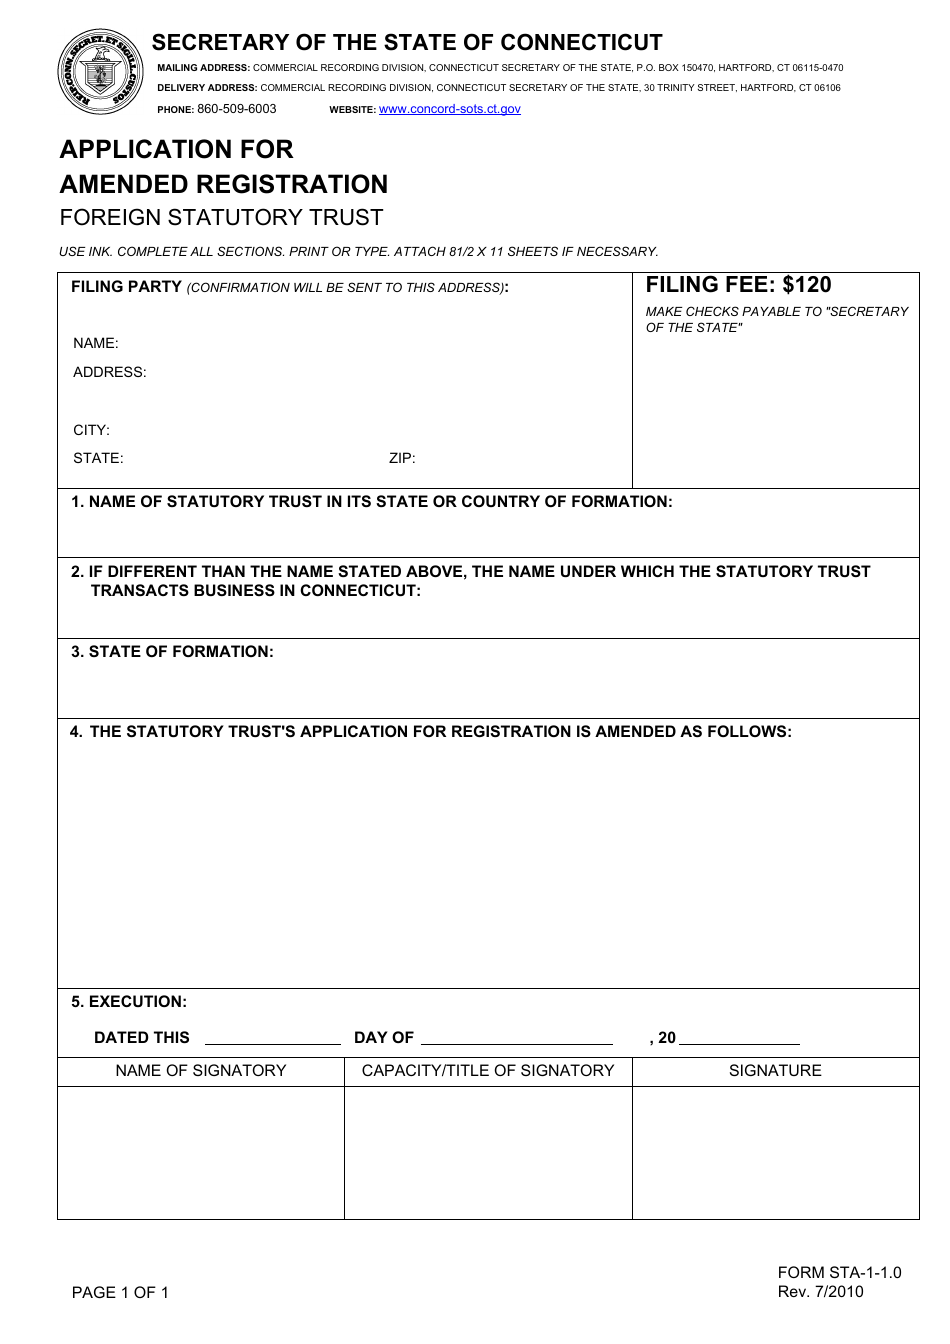 Form STA-1-1.0 Application for Amended Registration - Foreign Statutory Trust - Connecticut, Page 1